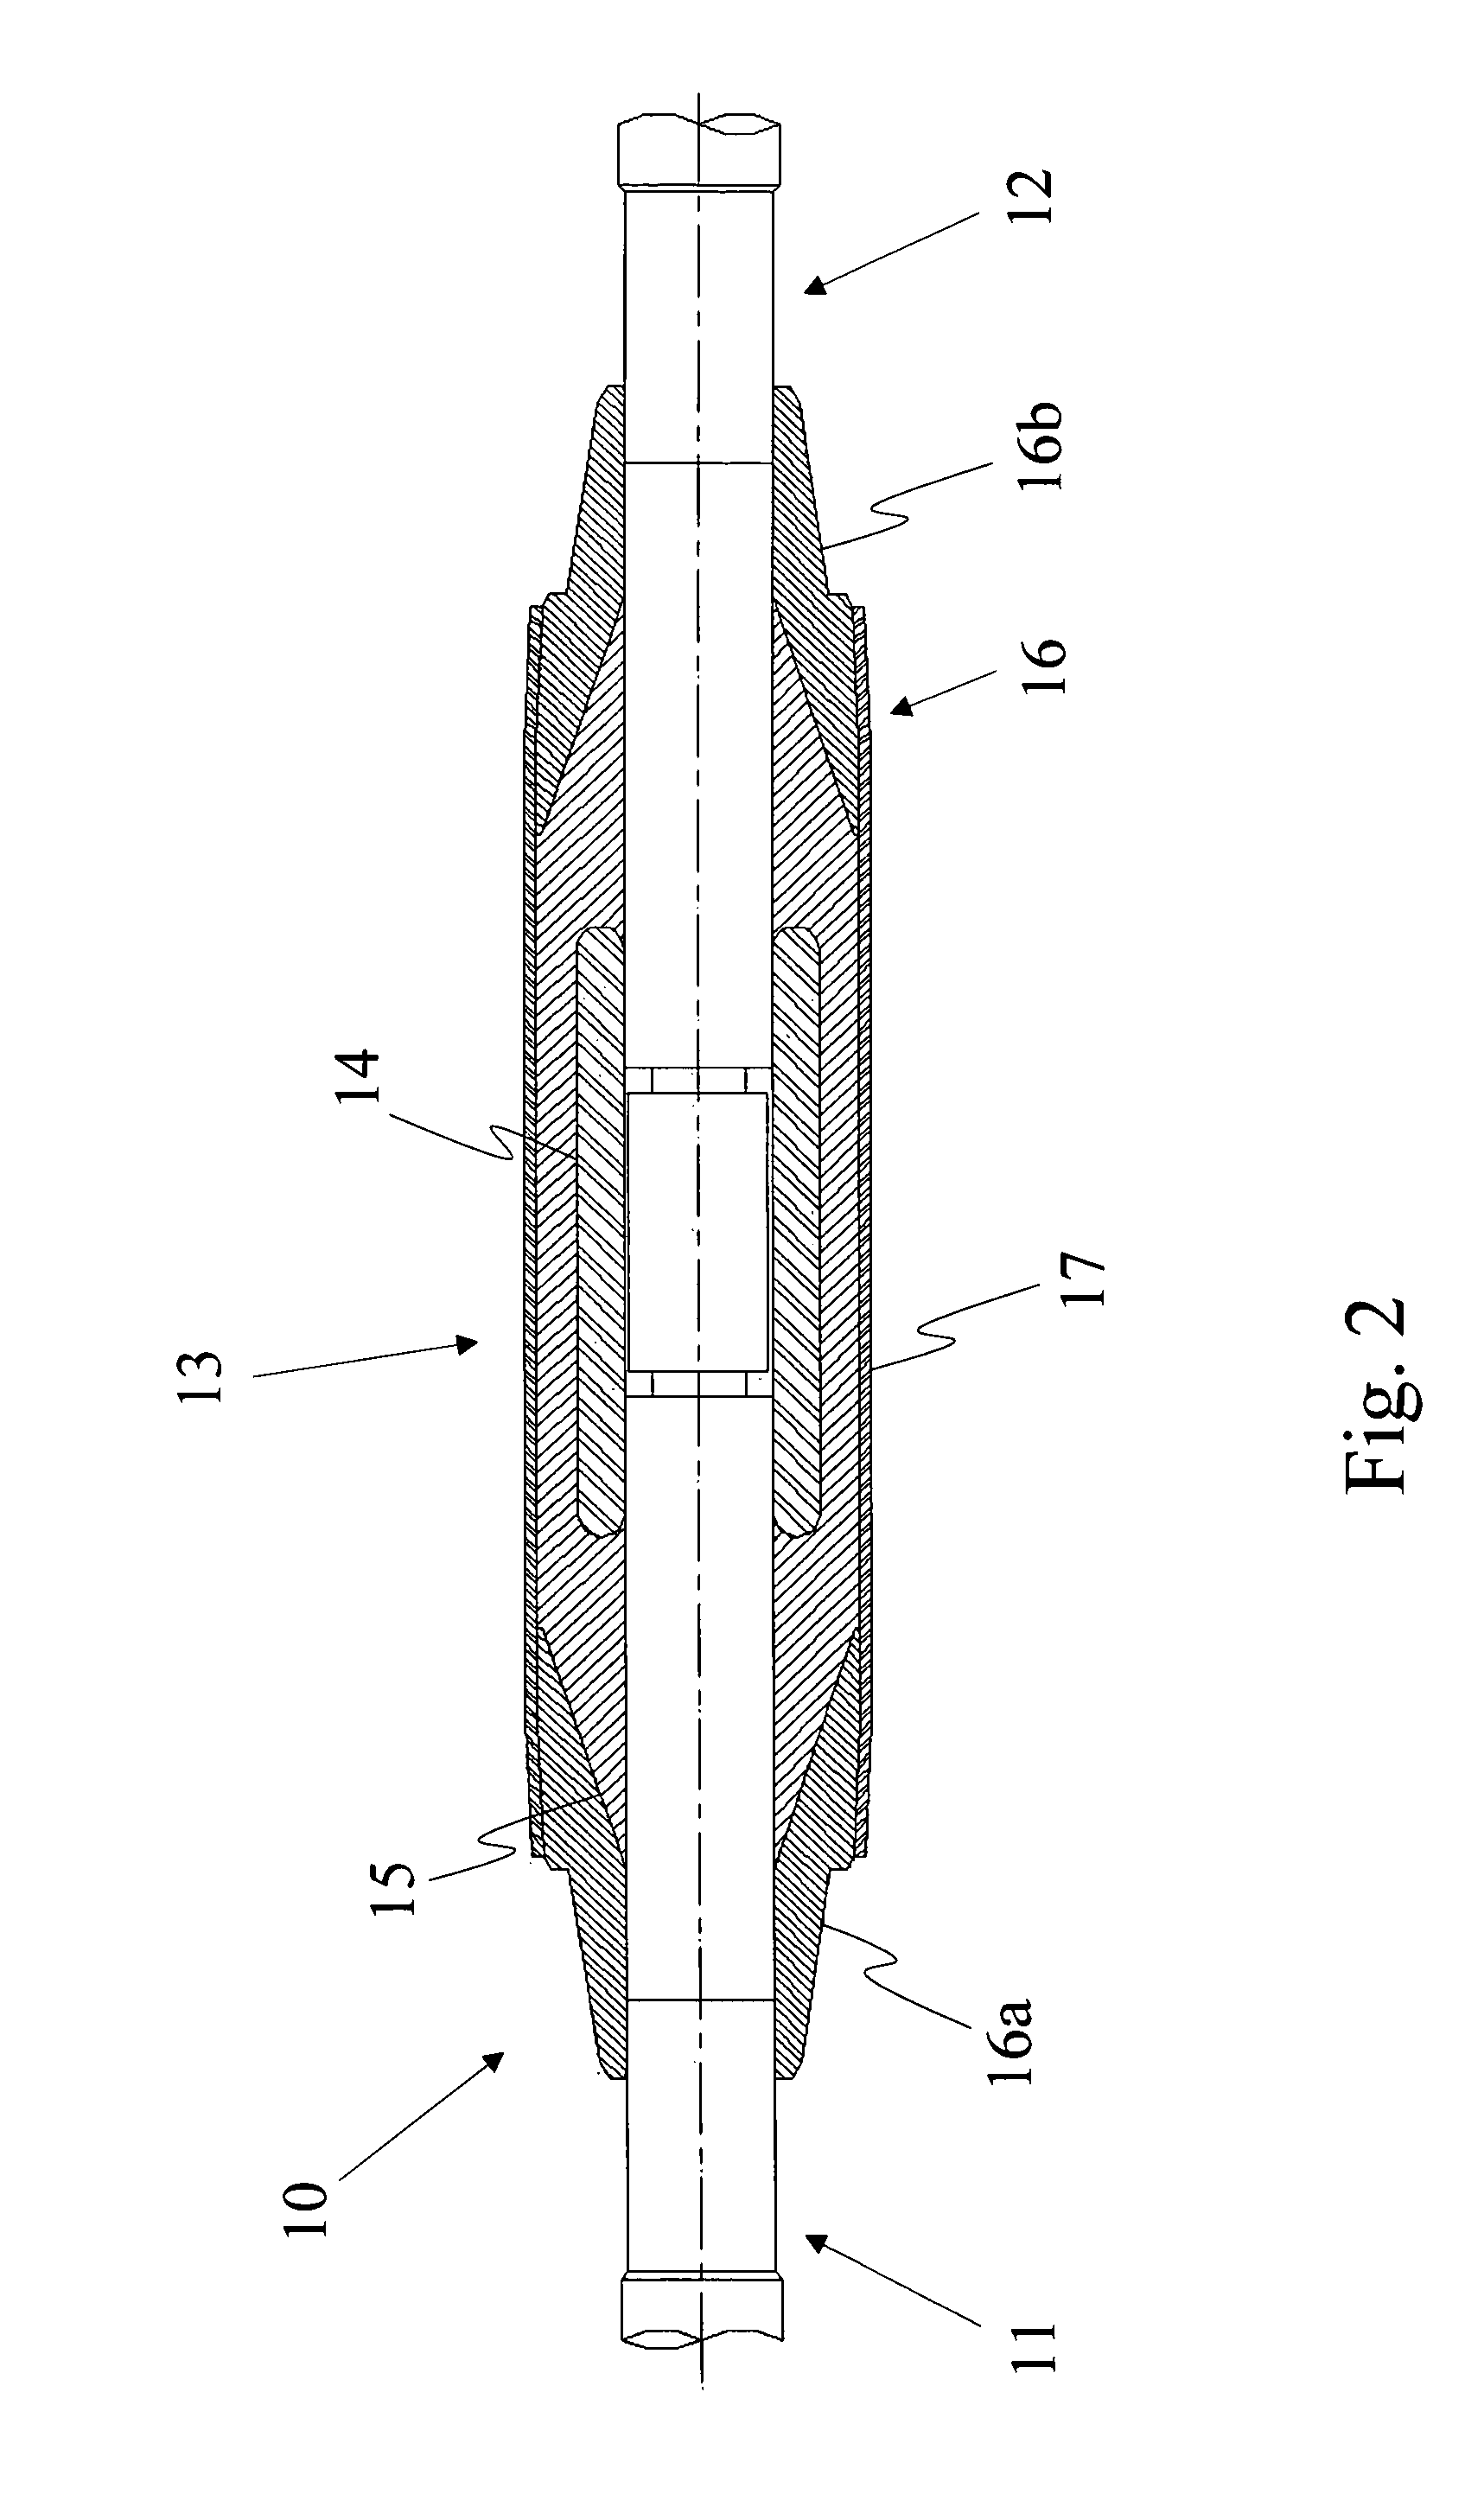 Electric article comprising at least one element made from a semiconductive polymeric material and semiconductive polymeric composition